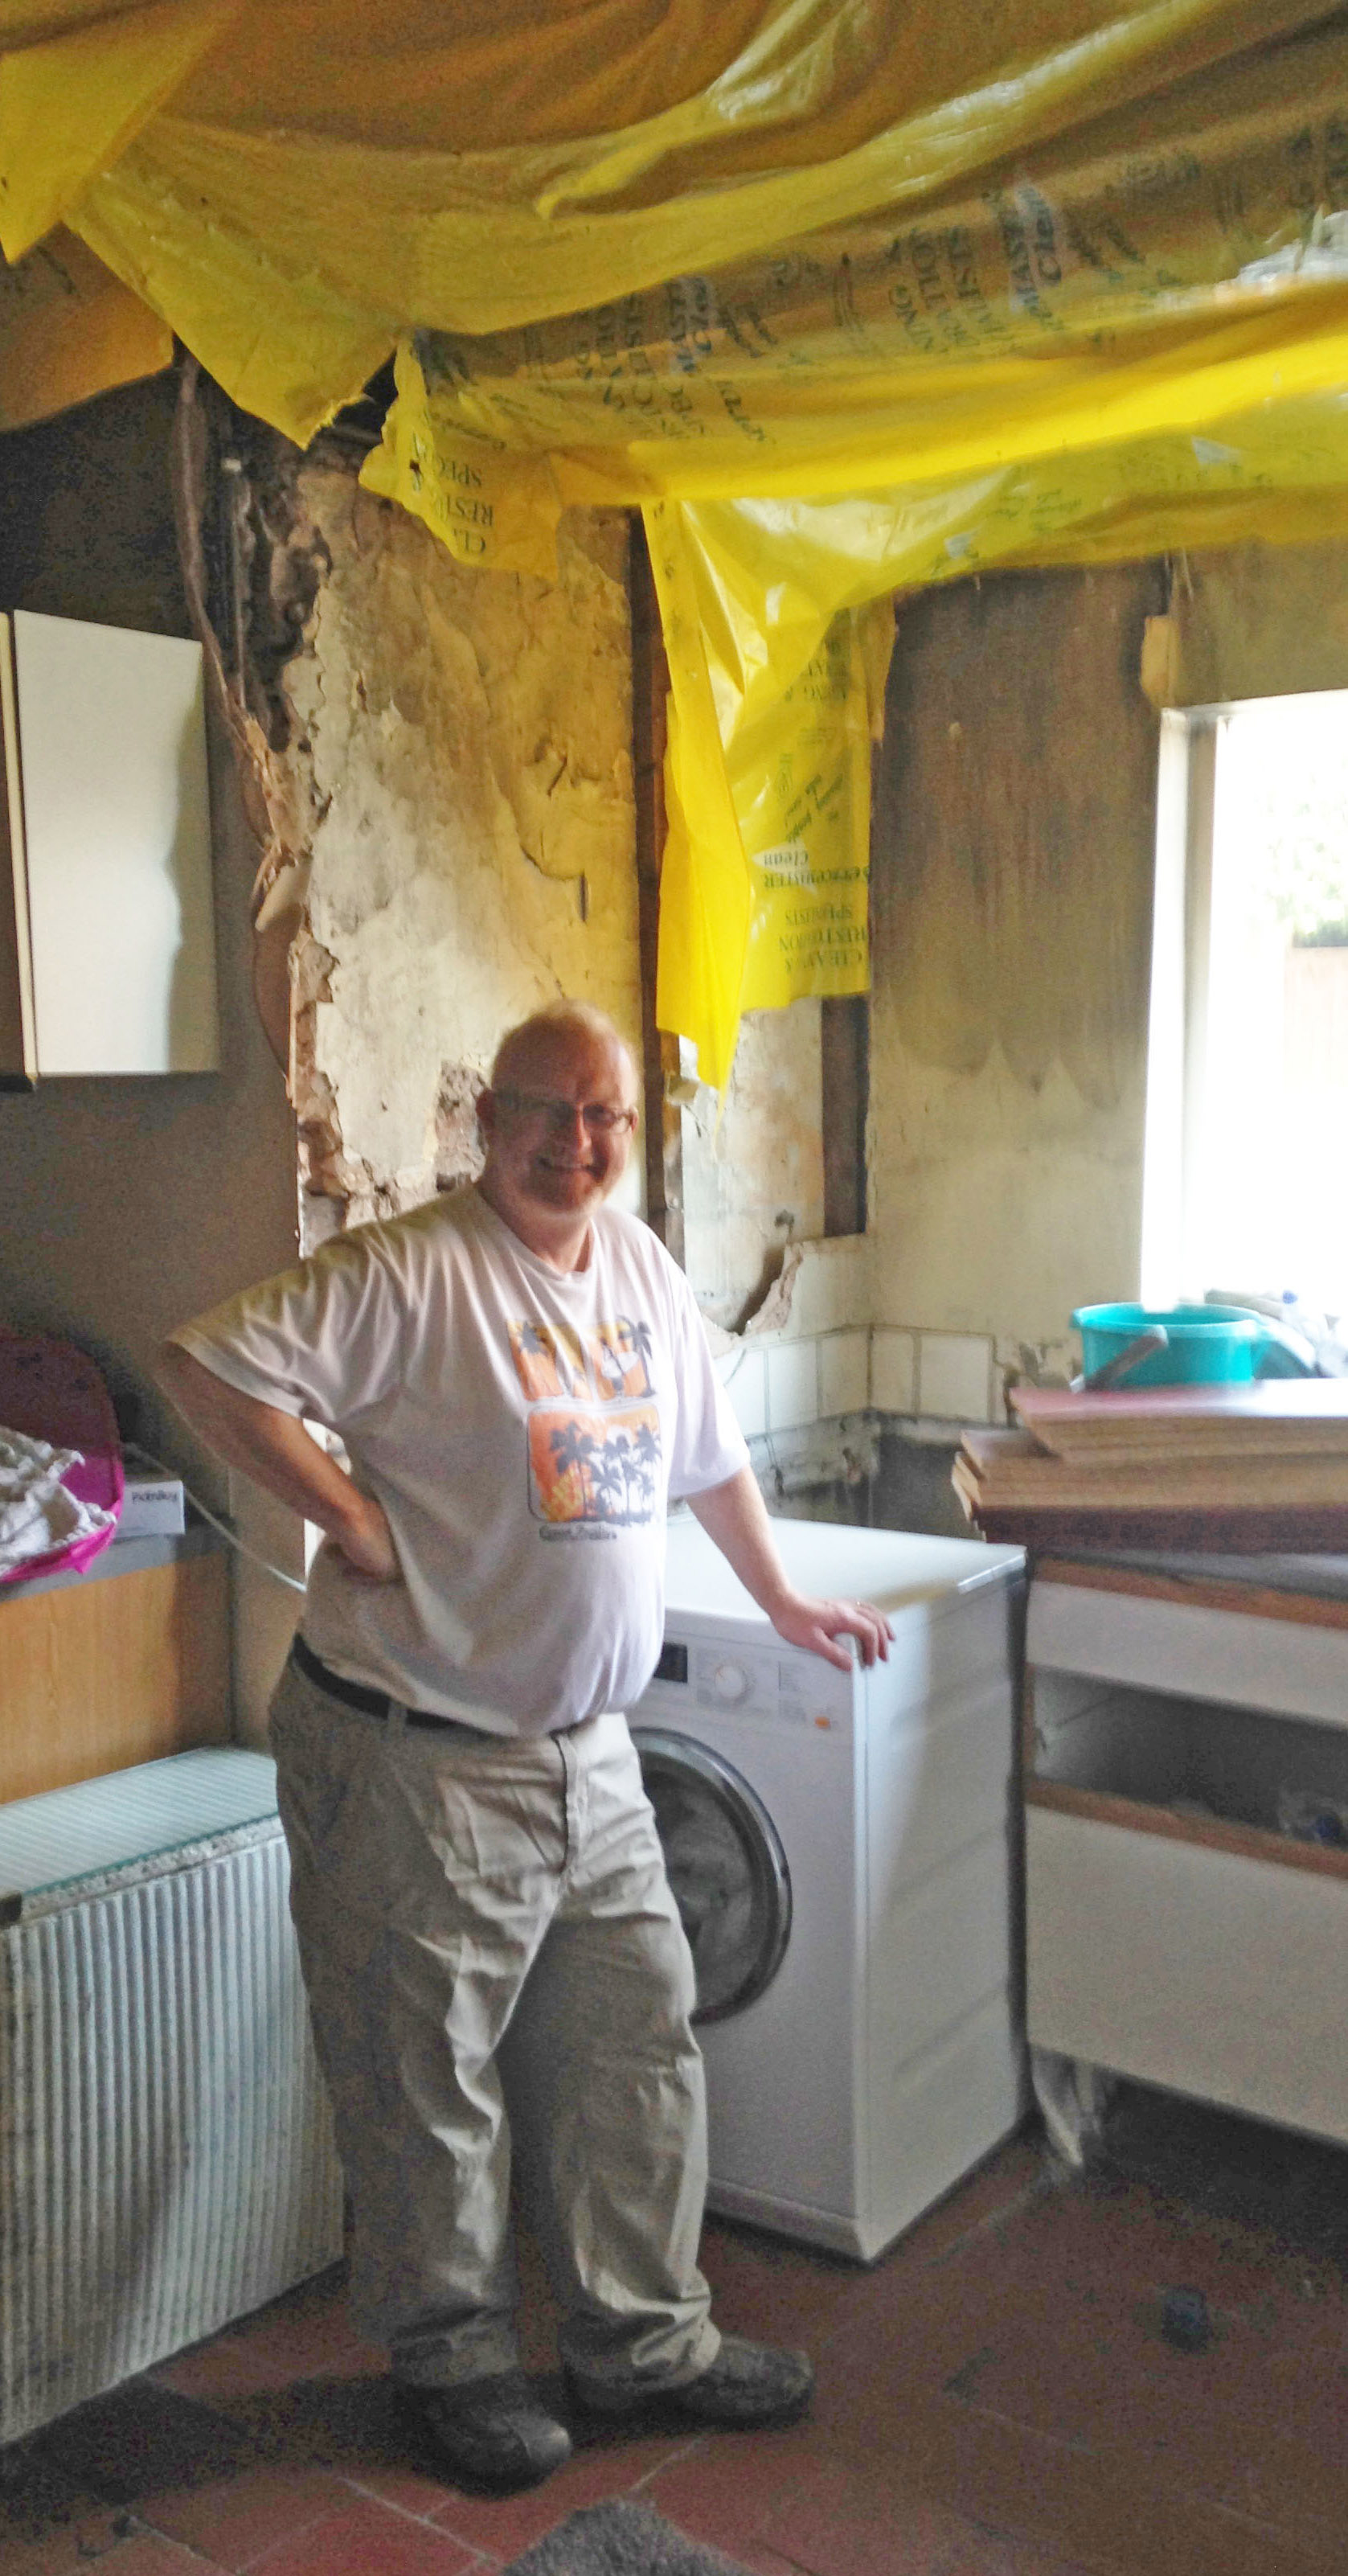 A washing machine fire caused £40,000 damage to Geoff Williams’s historic 18th century Shropshire home 